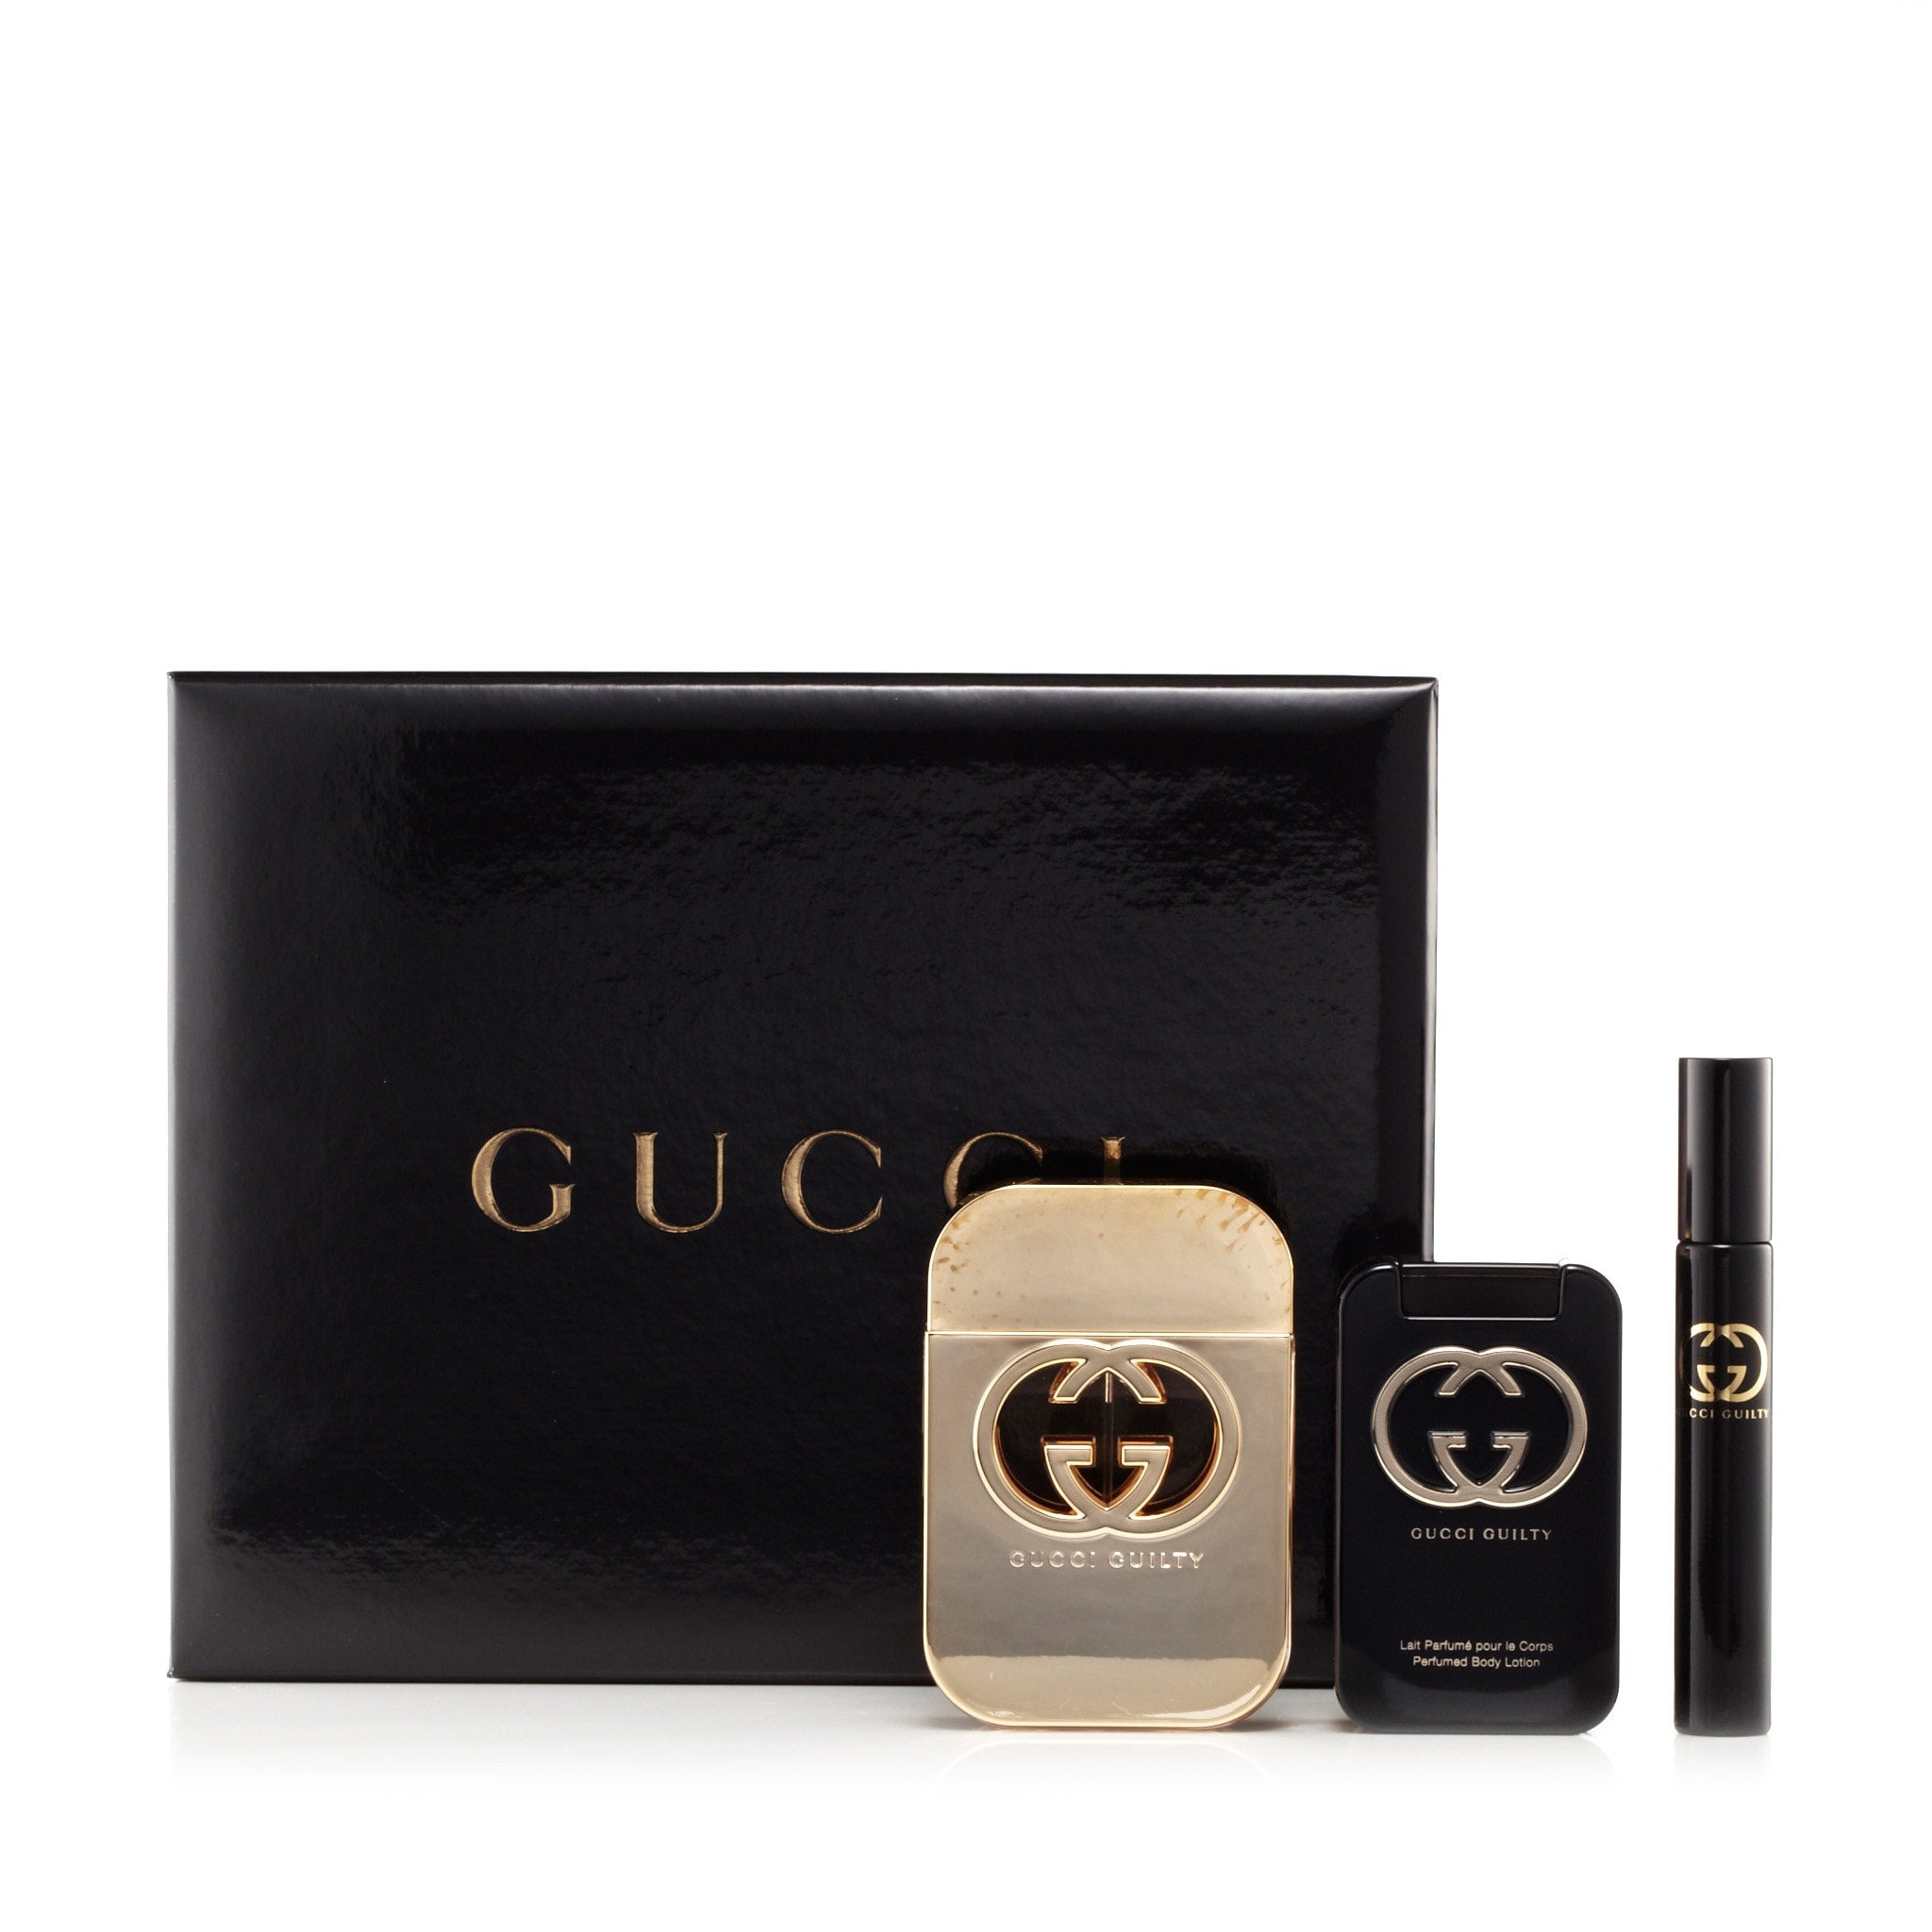 Guilty Gift Set for Women by Gucci – Fragrance Outlet